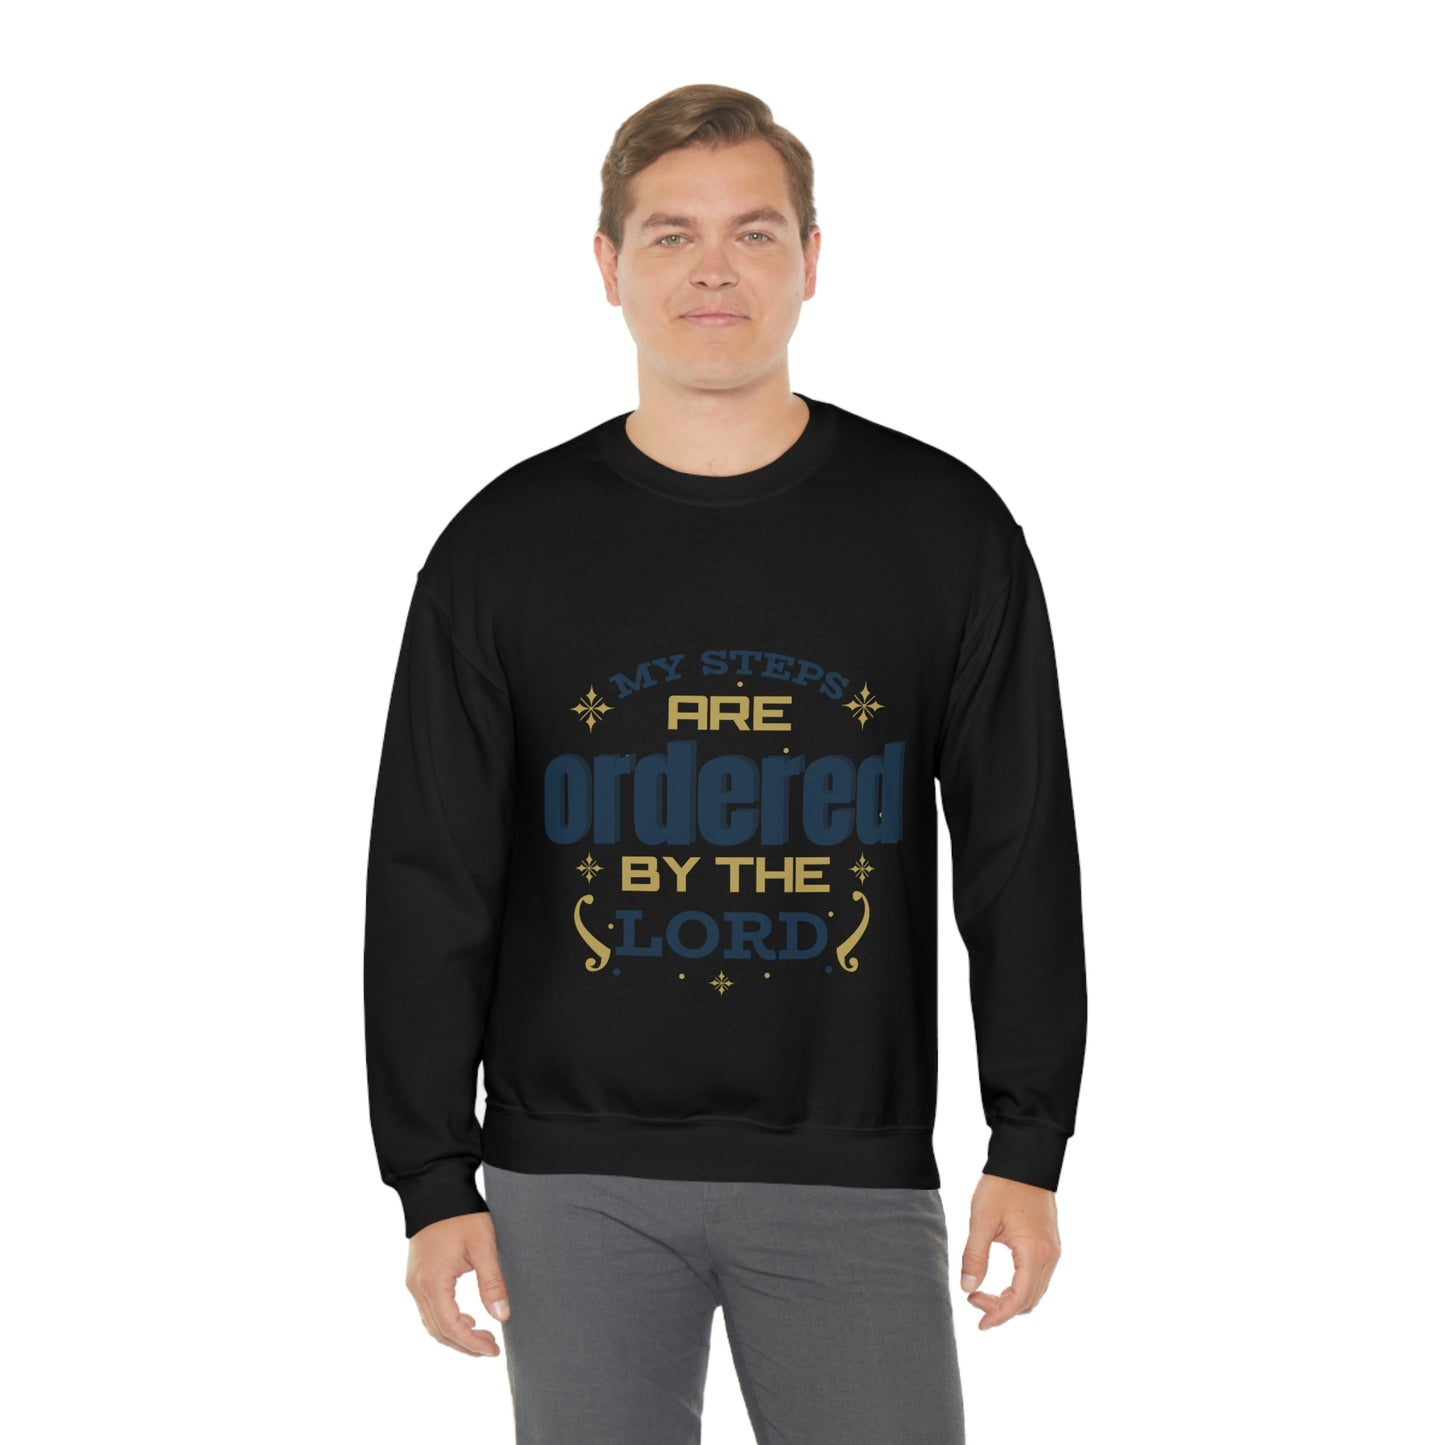 My Steps Are Ordered By The Lord Unisex Heavy Blend™ Crewneck Sweatshirt